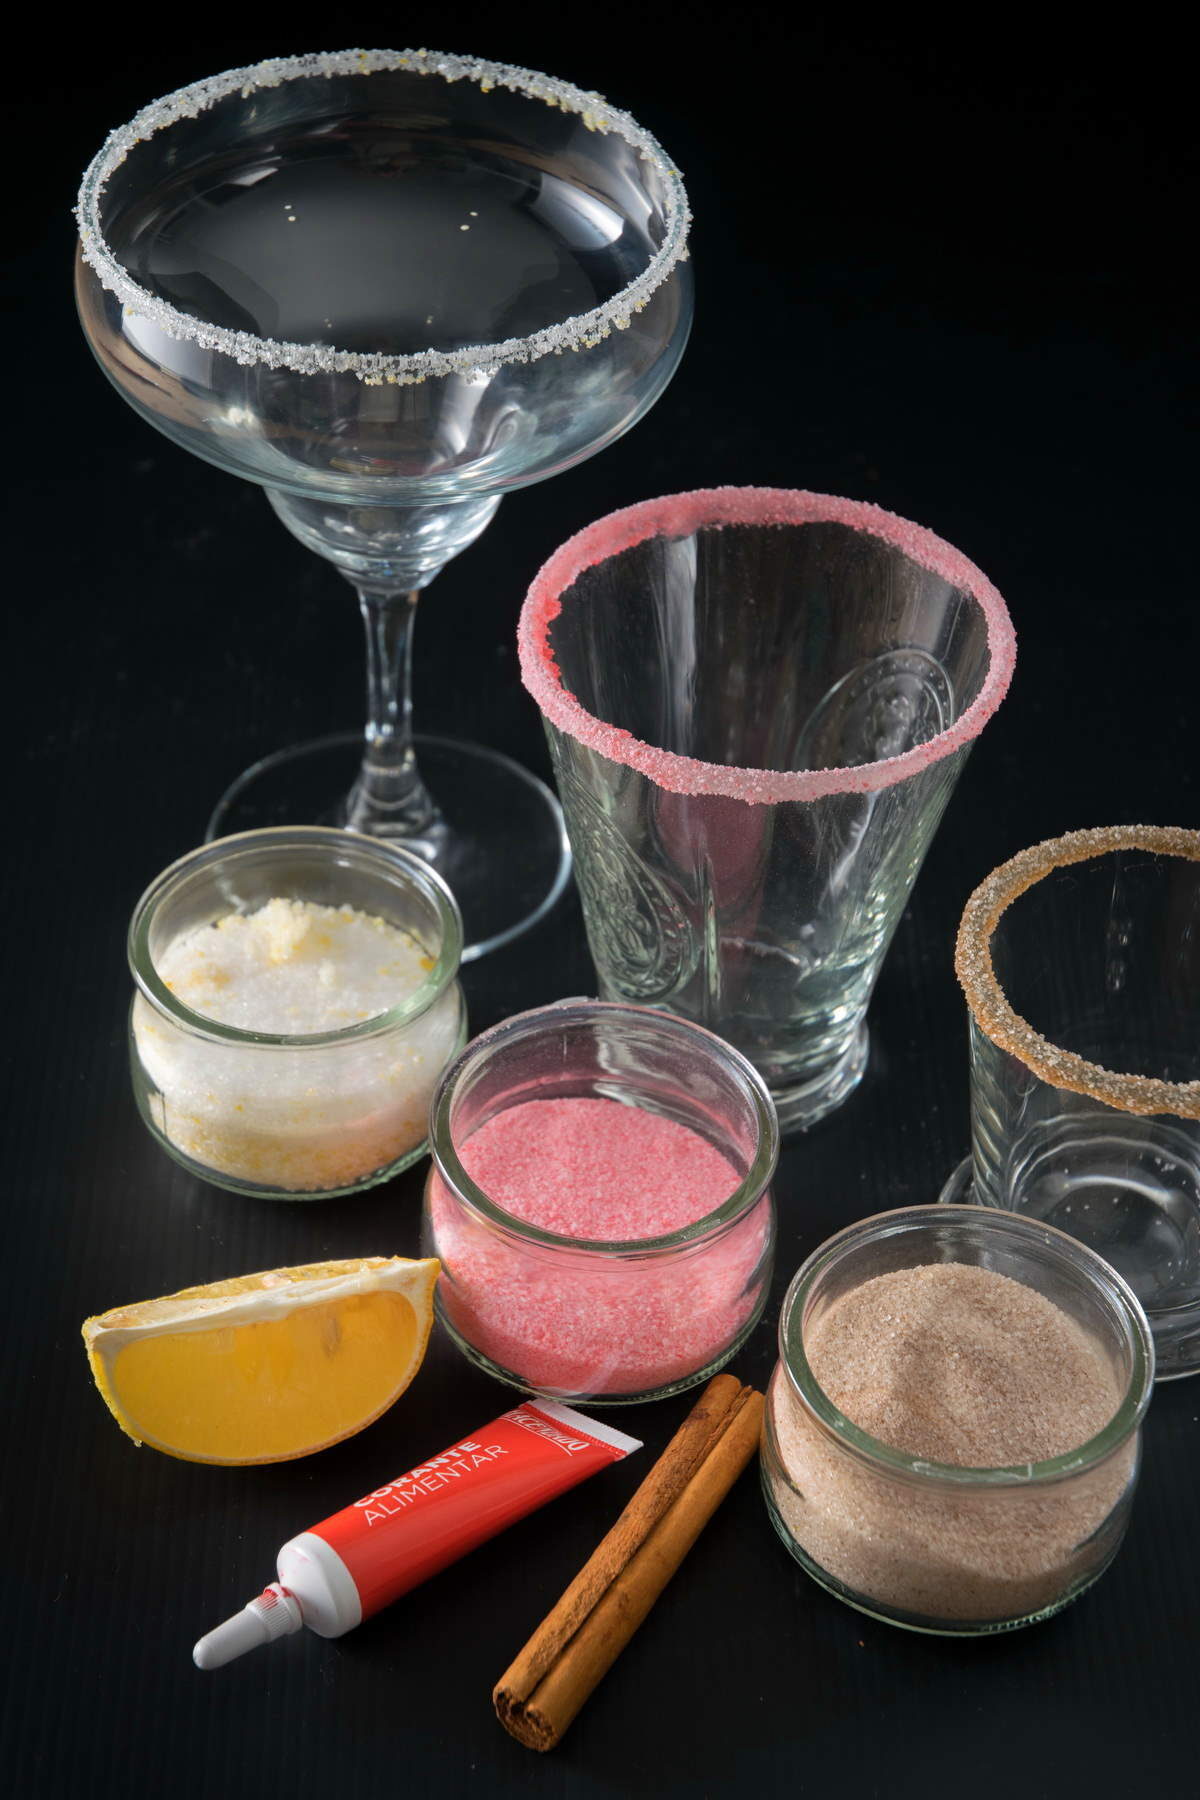 Sugar rim flavors in 3 jars with glasses in the background.